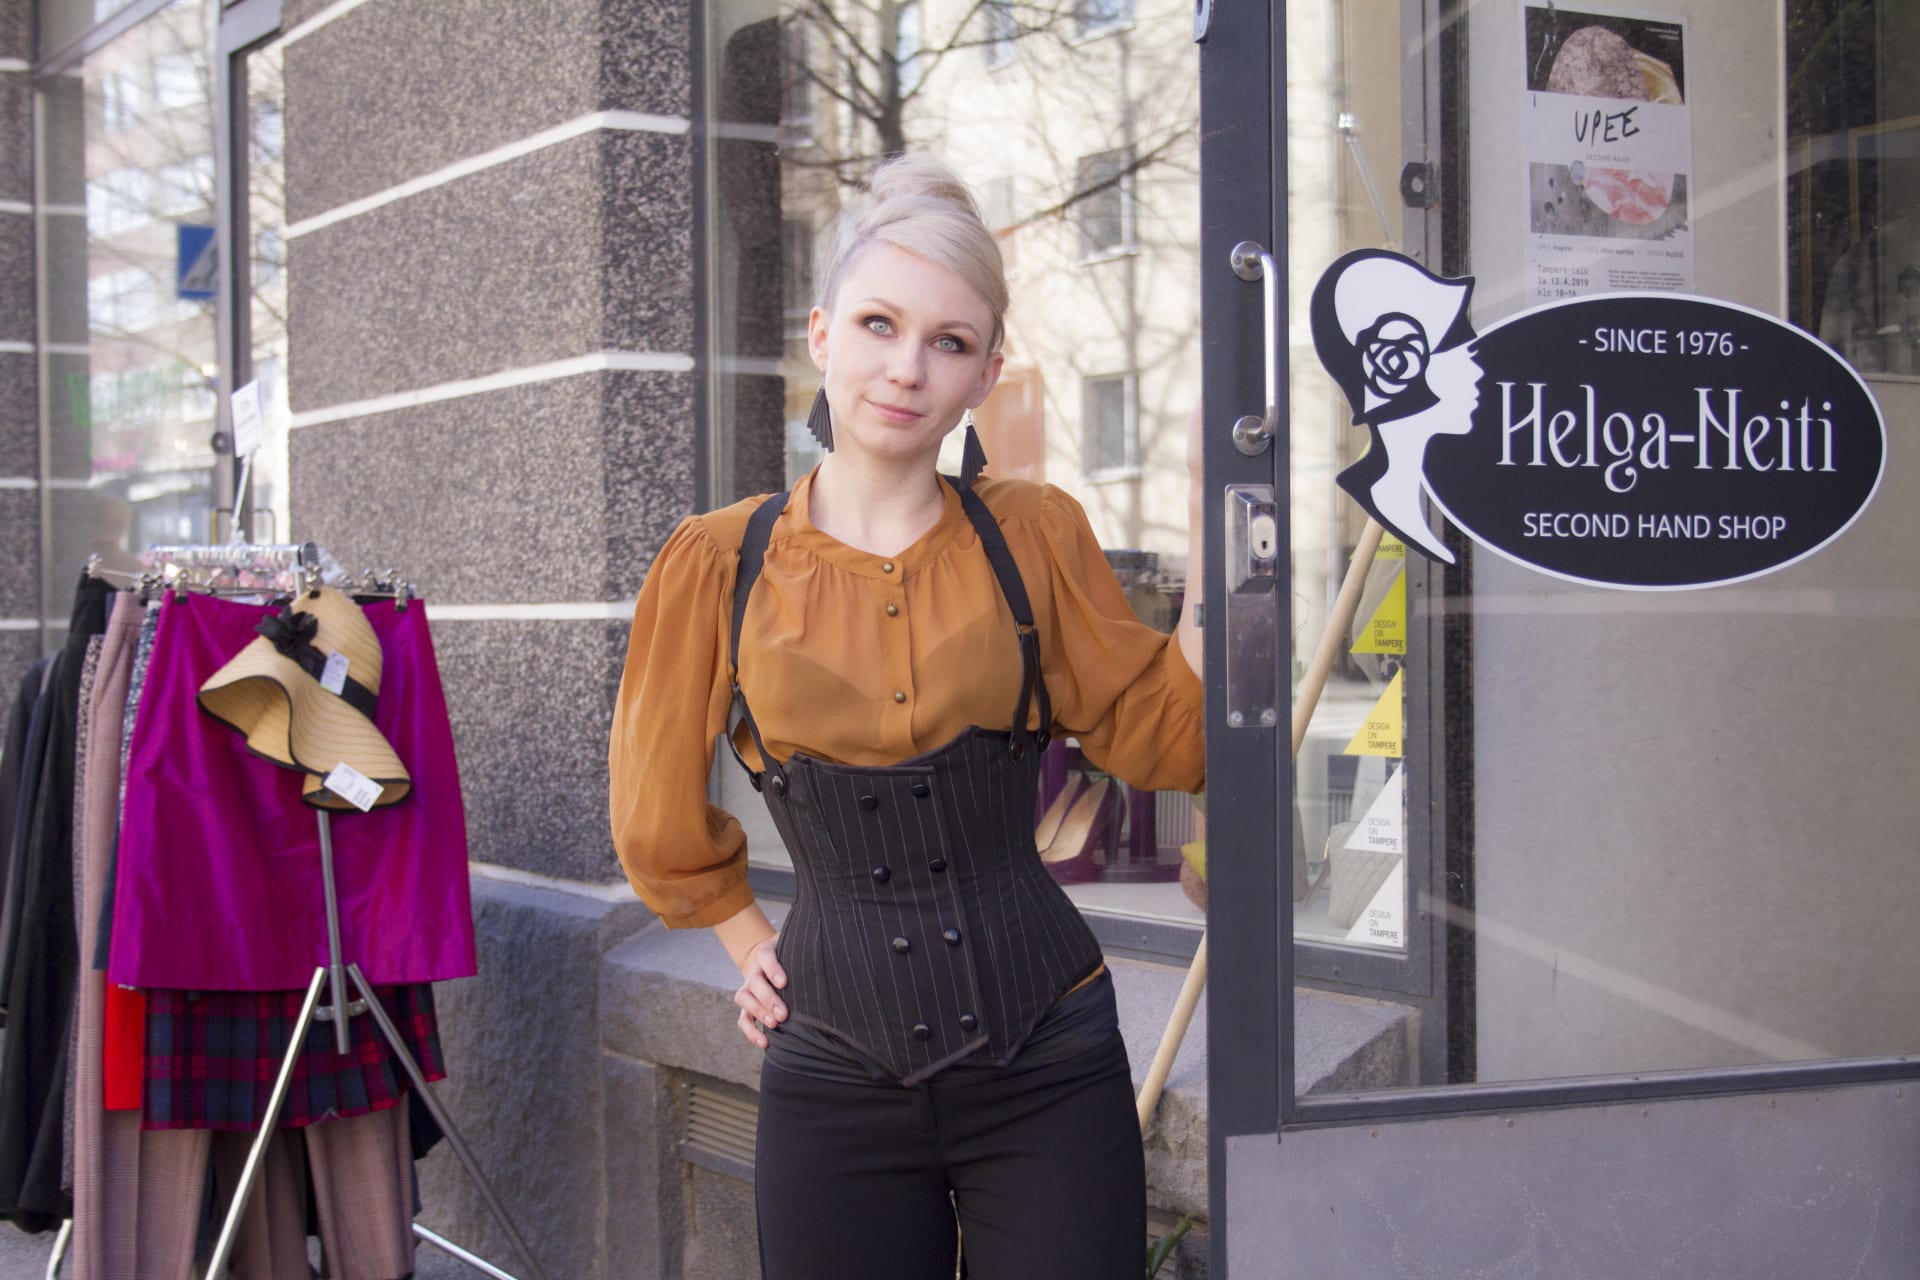 Welcome to Helga-Neiti, the oldest second hand -shop in Tampere!